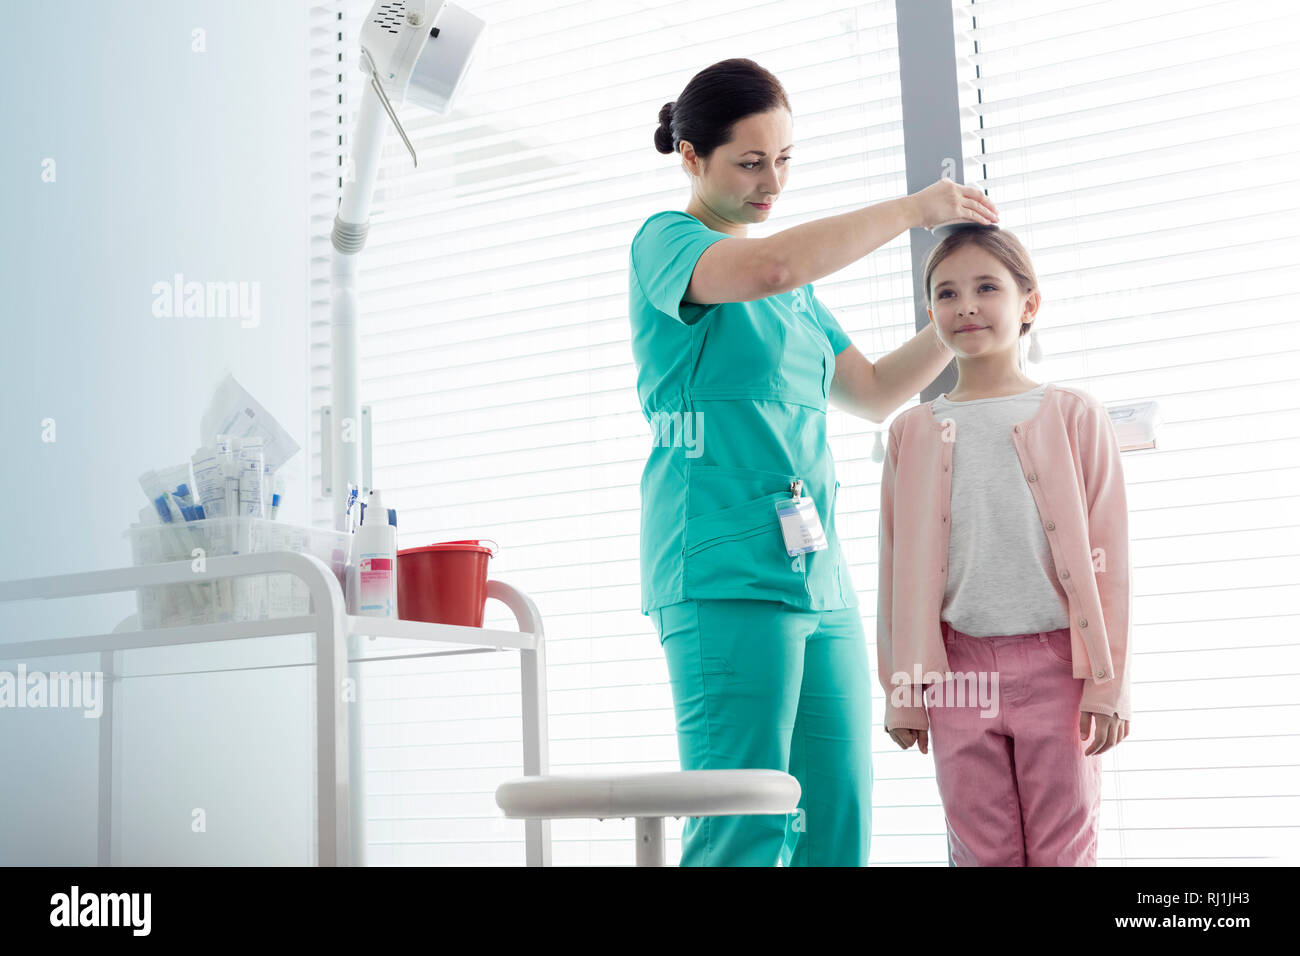 Nurse measuring height of girl against window at examination room Stock Photo